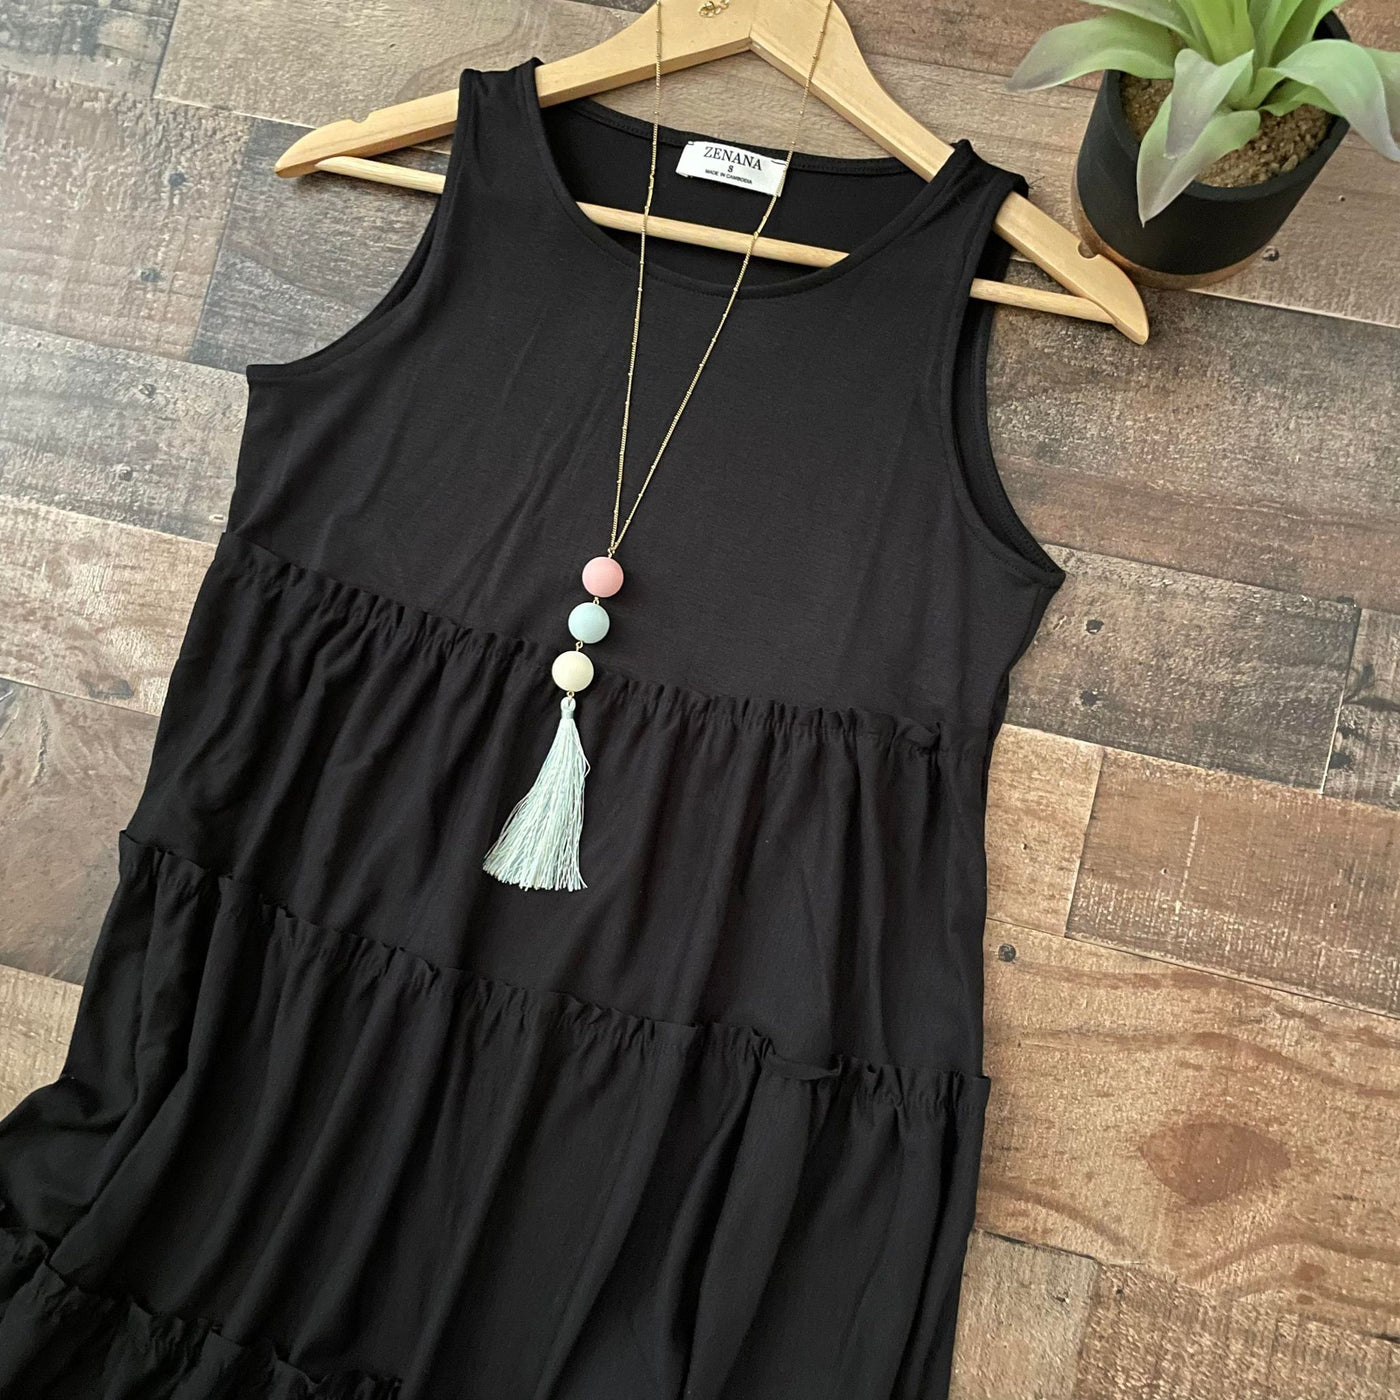 Charmingly Cute: Sleeveless Tiered Black Dress for Effortless Style